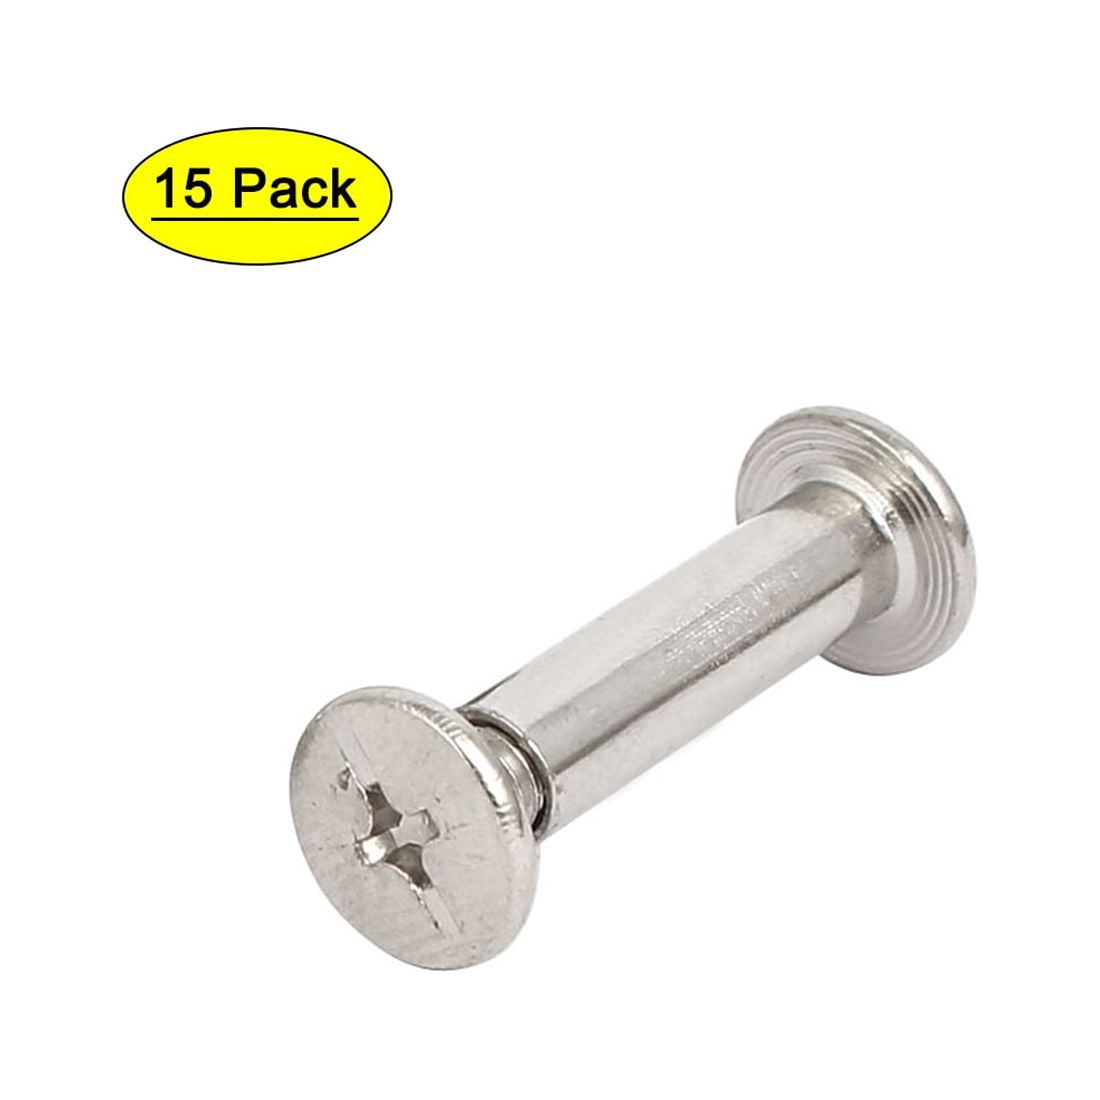 Screw Staples 5mm Binding Screw Kit 5 Size Stud Rivets With Plastic Box Screw  Rivets For Belt Binding Leather Trim Collar (silver)